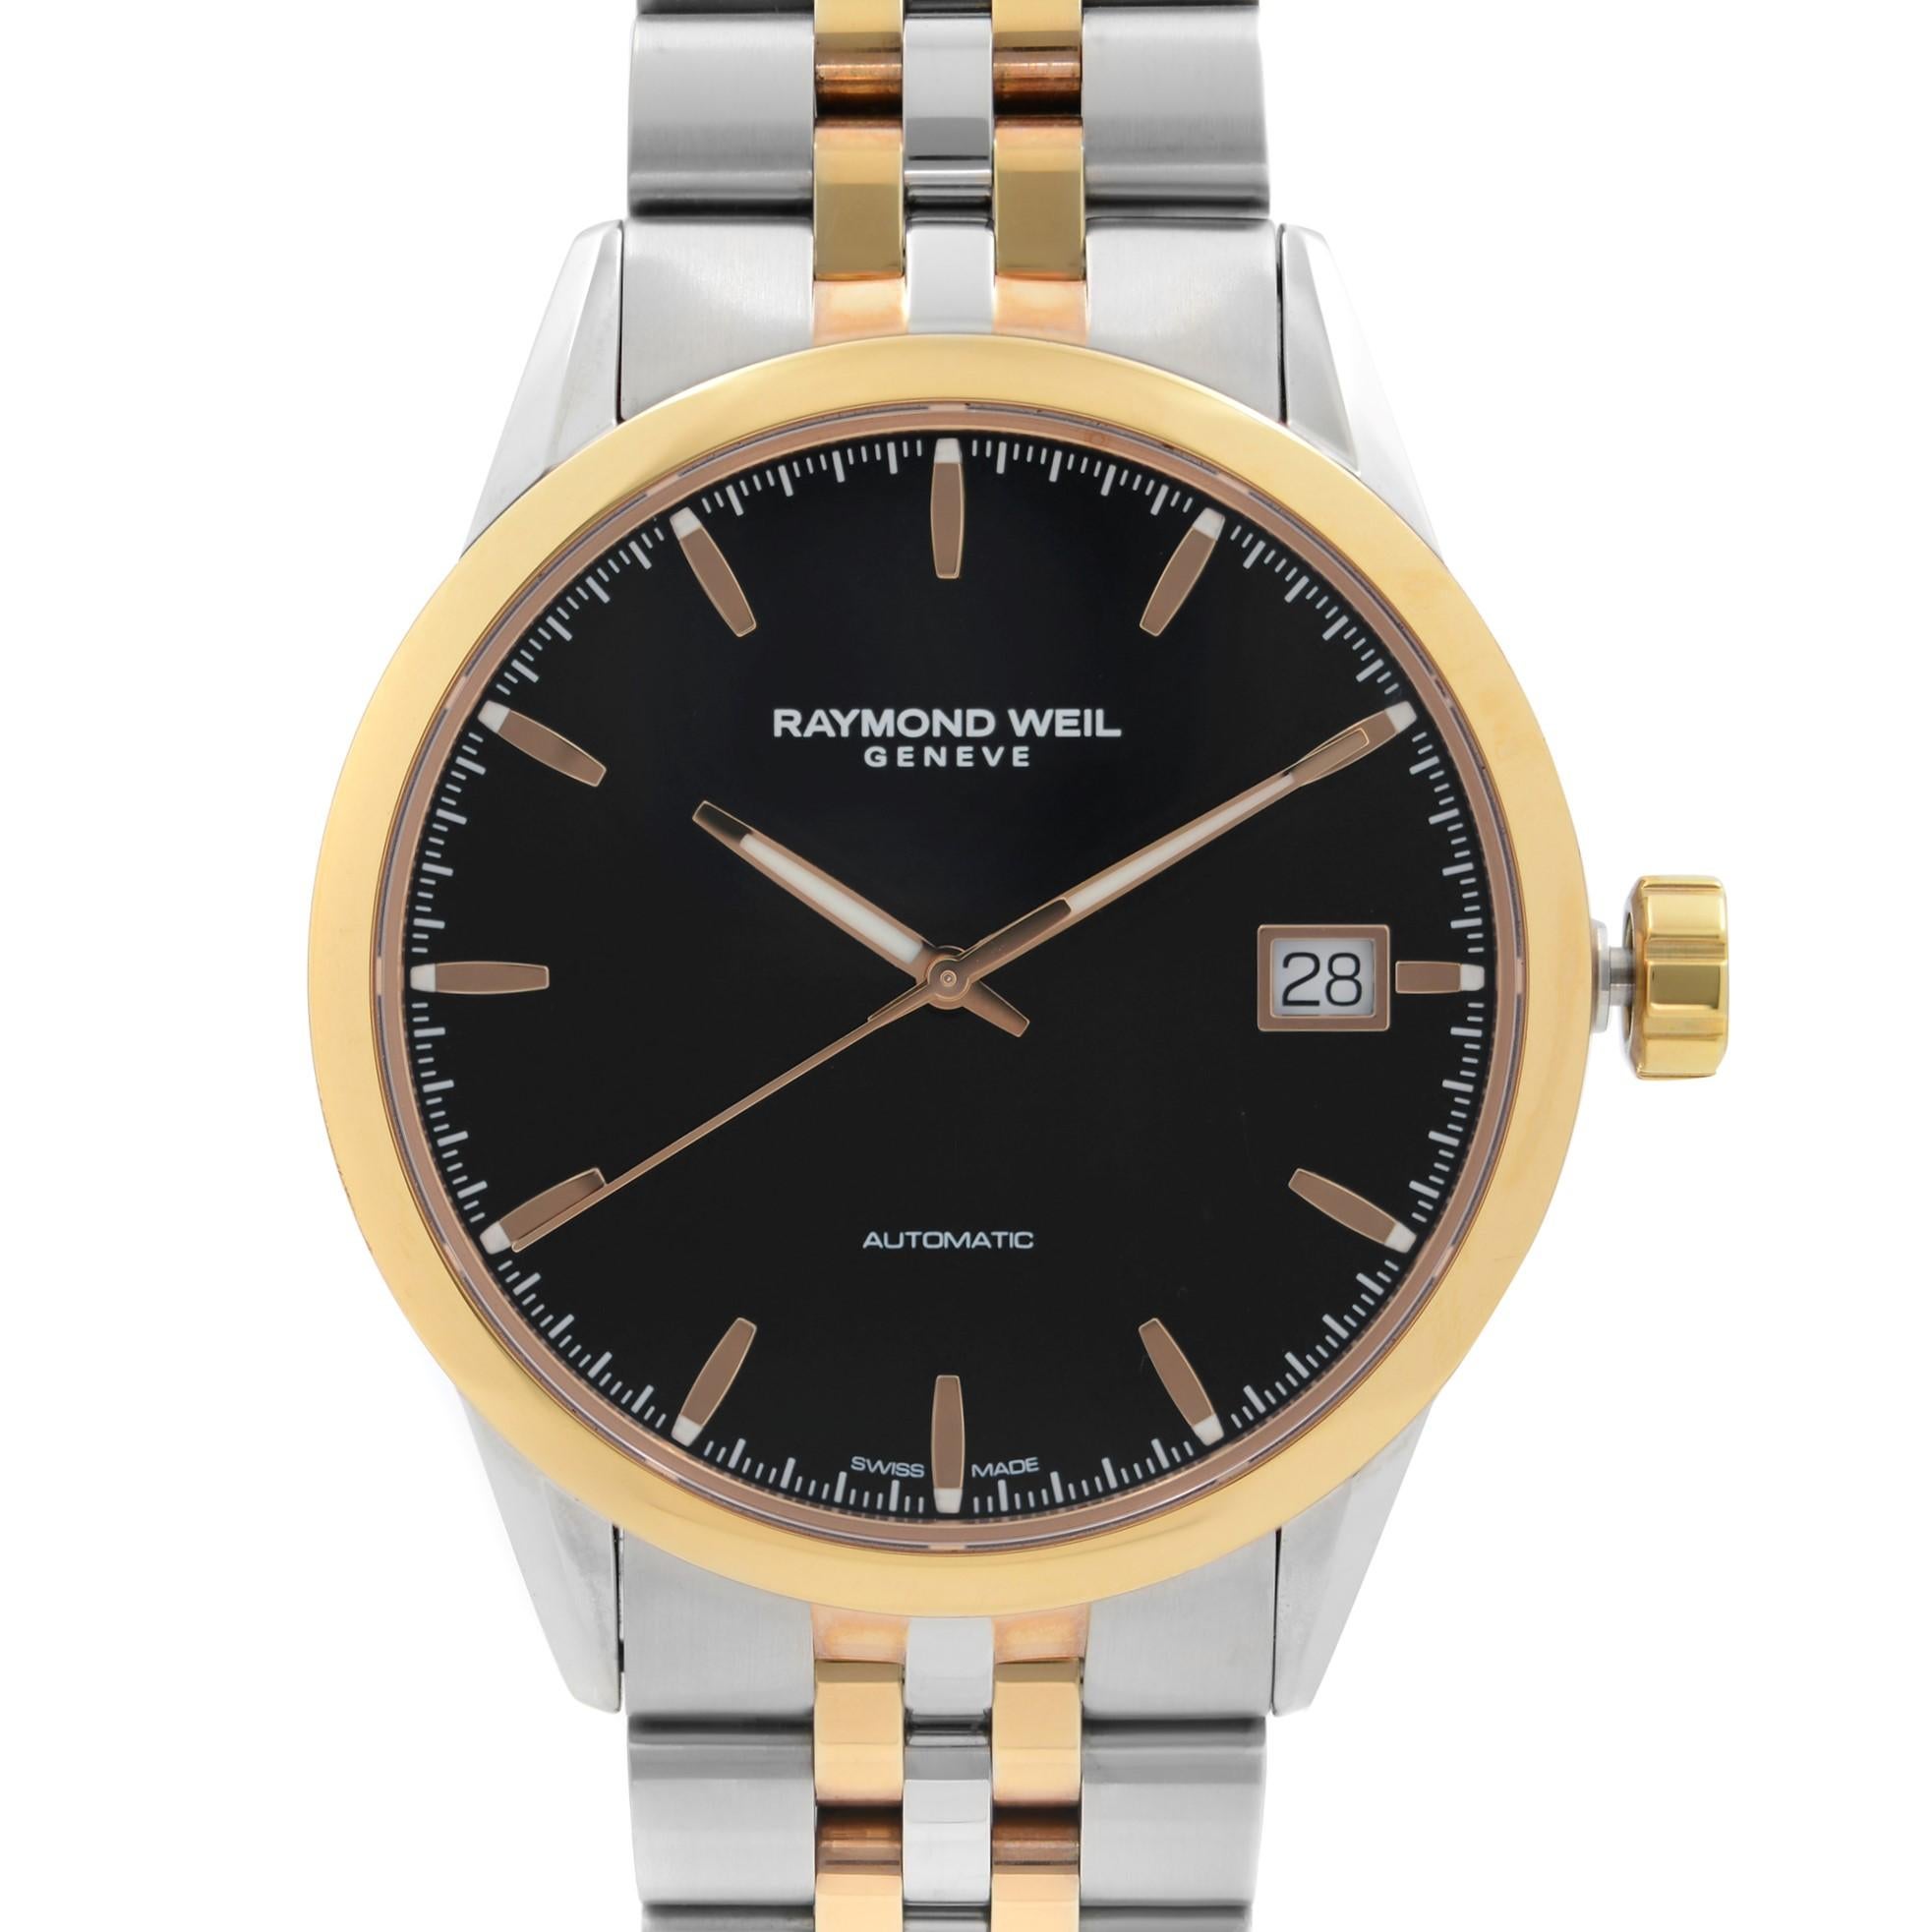 Store Display Model Never Worn. Can have minor blemishes on gold tone parts. Raymond Weil Freelancer Steel Black Dial Automatic Men's Watch 2740-SP5-20011. This Beautiful Timepiece Features: Stainless Steel Case and Two-Tone (Silver & Rose Gold PVD)